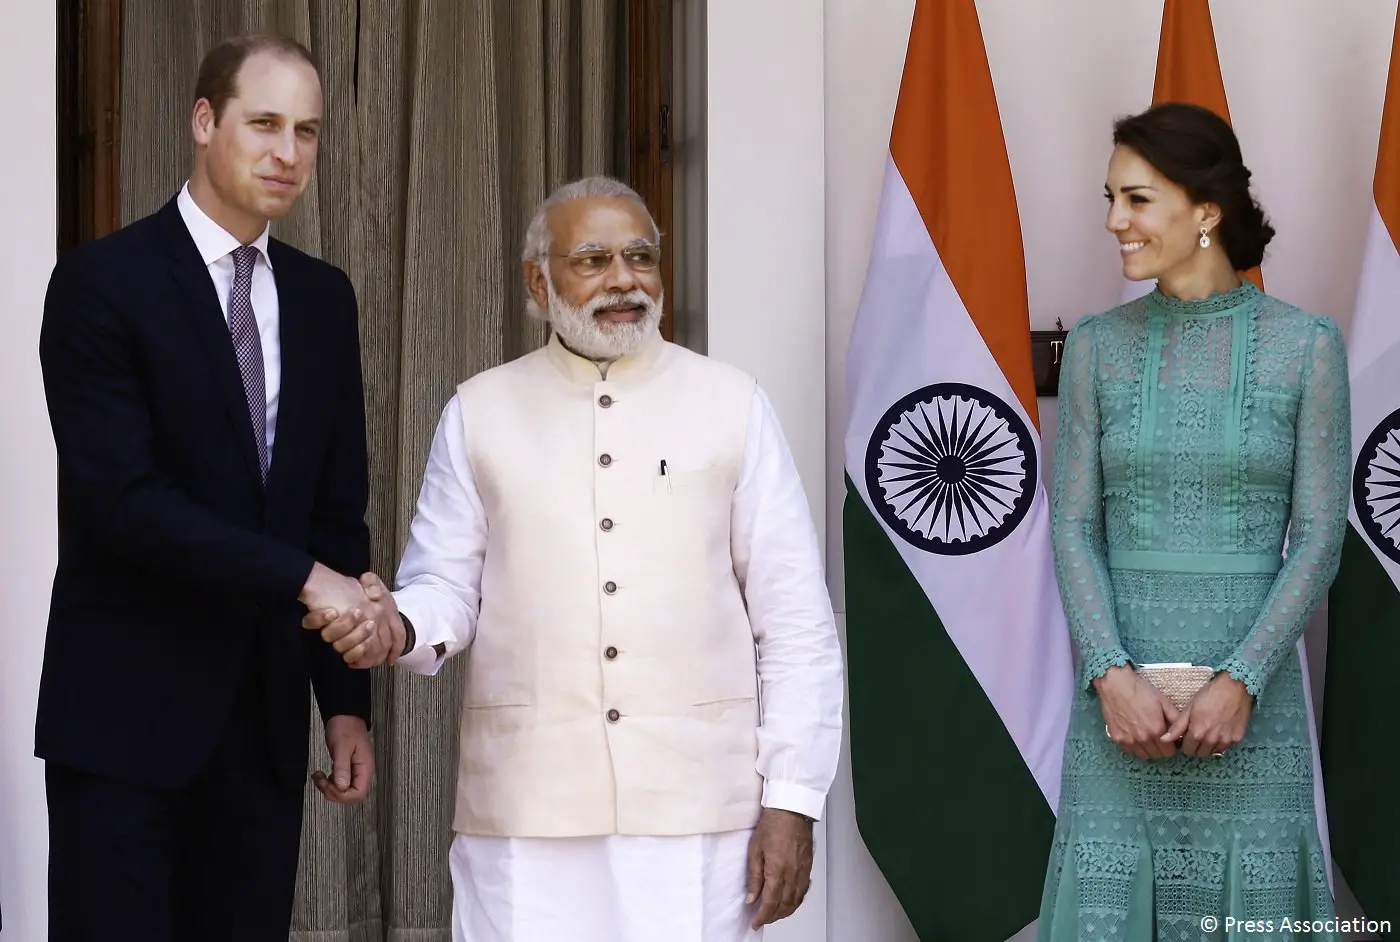 The Duke and Duchess of Cambridge with Indian Prime Minister